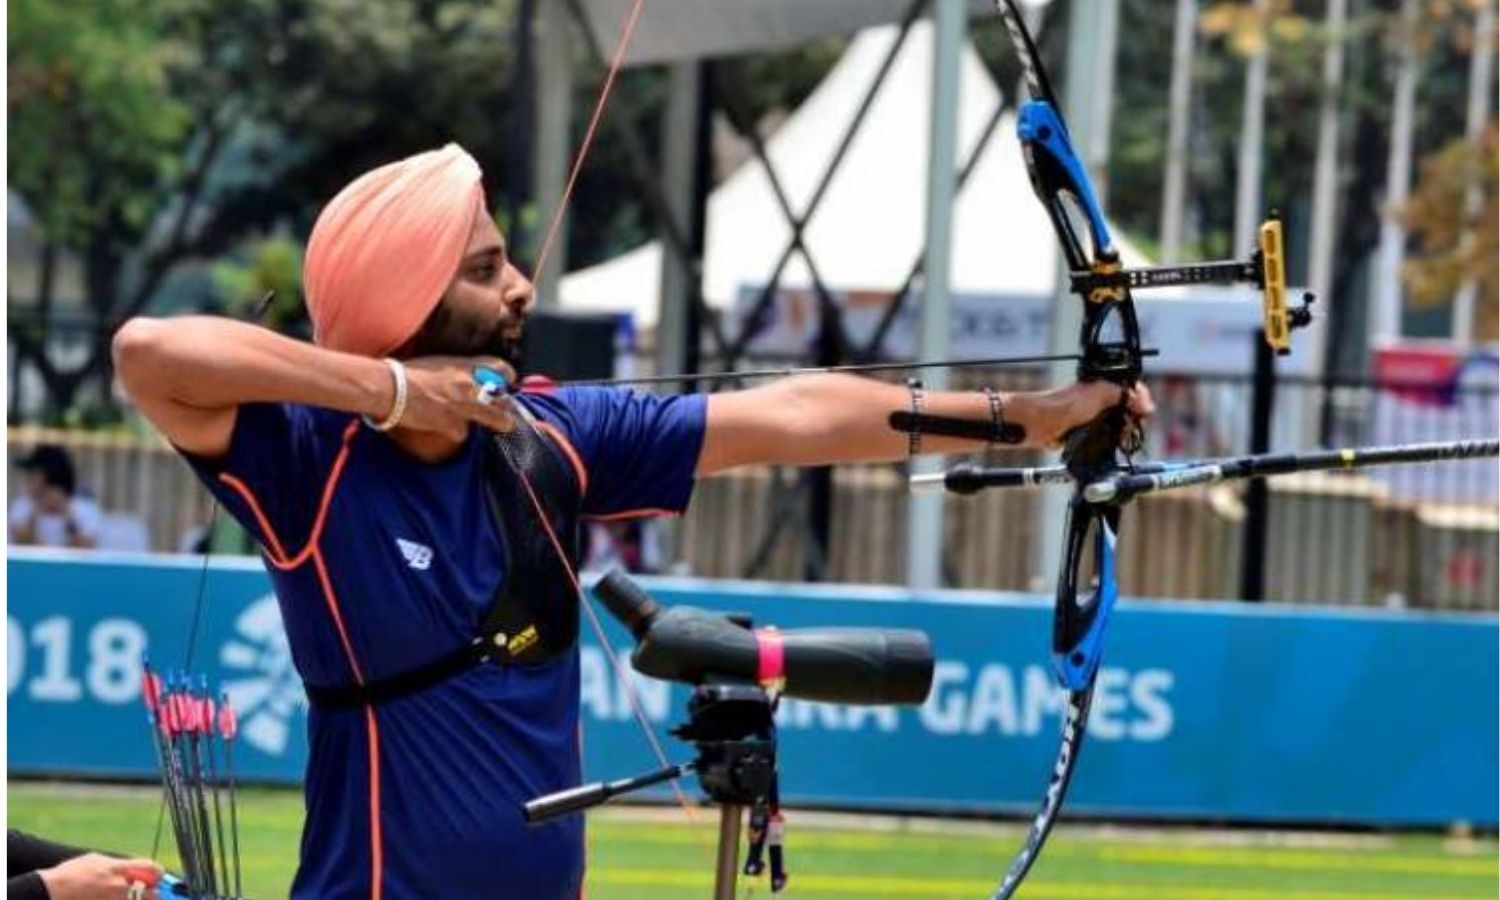 Legs adversely affected by an injection, archer Harvinder Singh aims gold  at Tokyo Paralympics